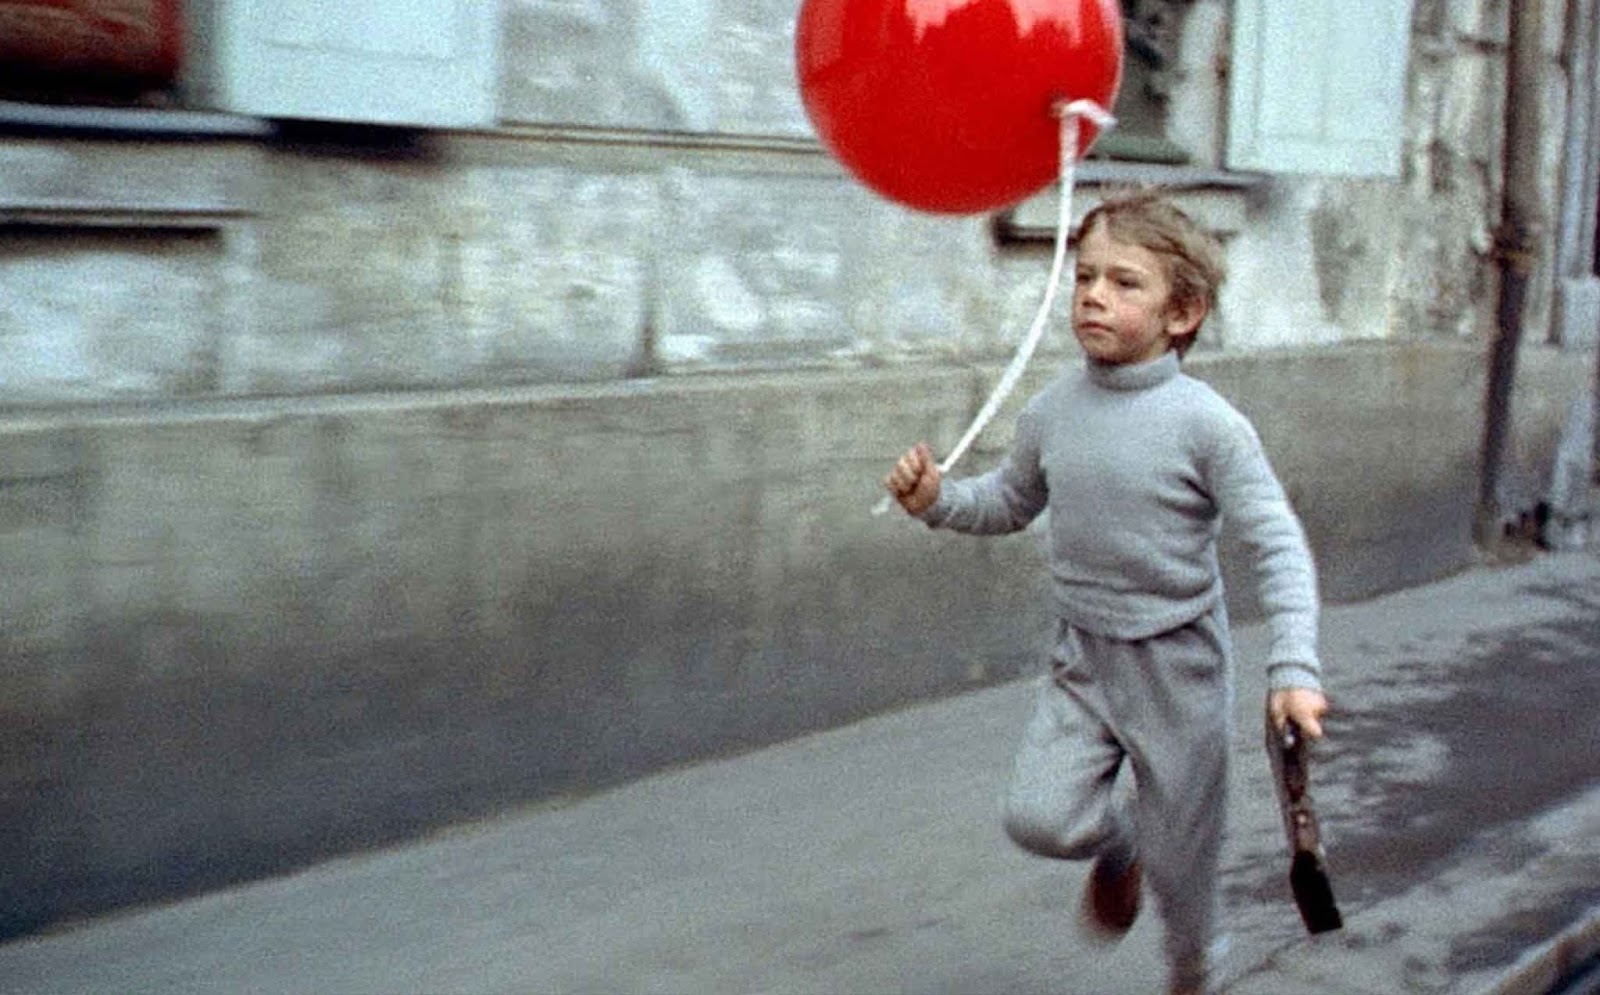 RETRO KIMMER'S BLOG: THE RED BALLOON (LE BALLON ROUGE) FILM AND BOOK 1956